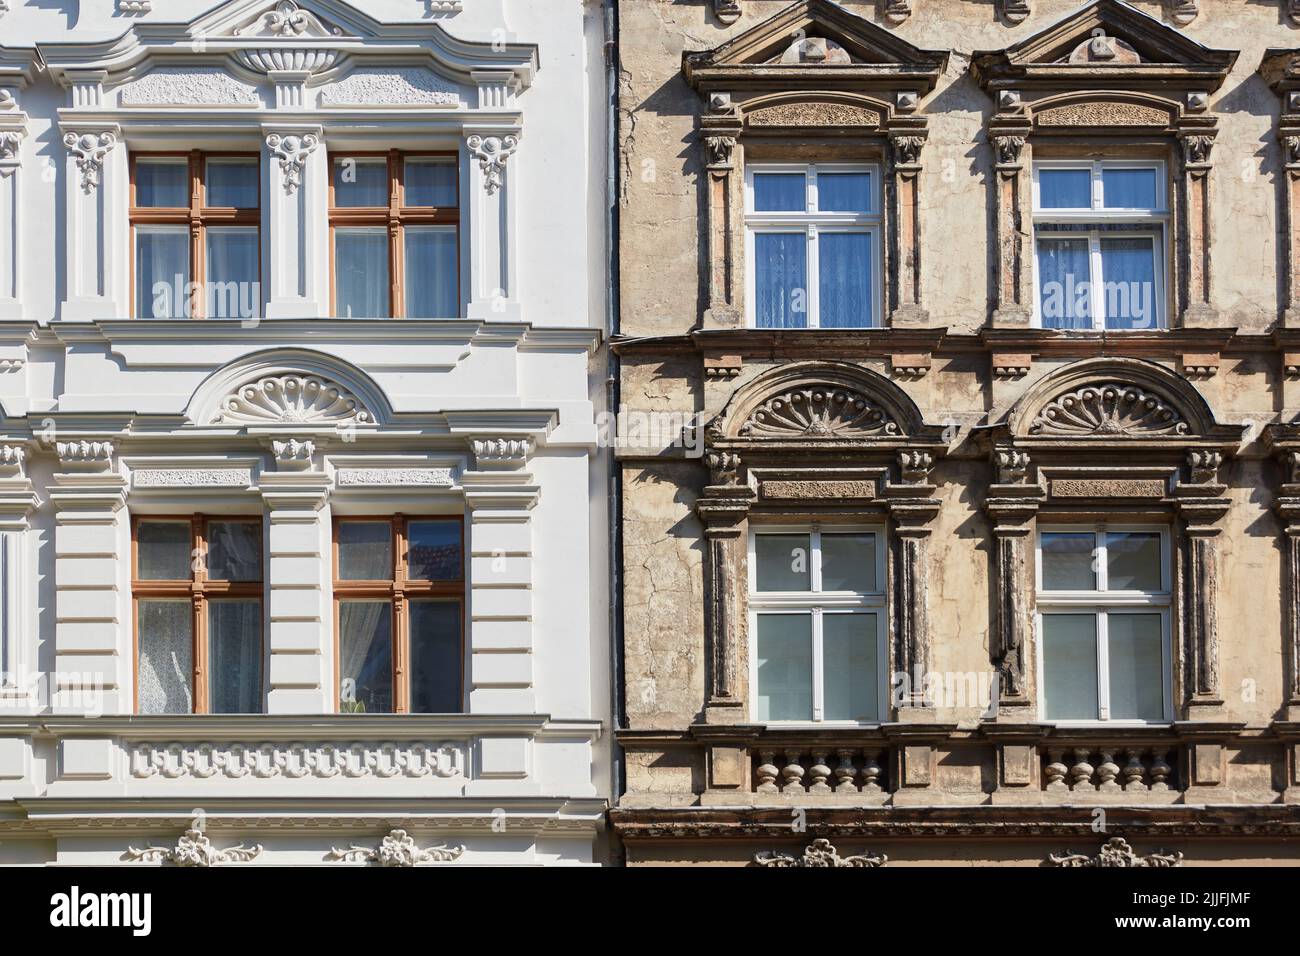 Old and new old building facade after renovation compared as background texture Stock Photo